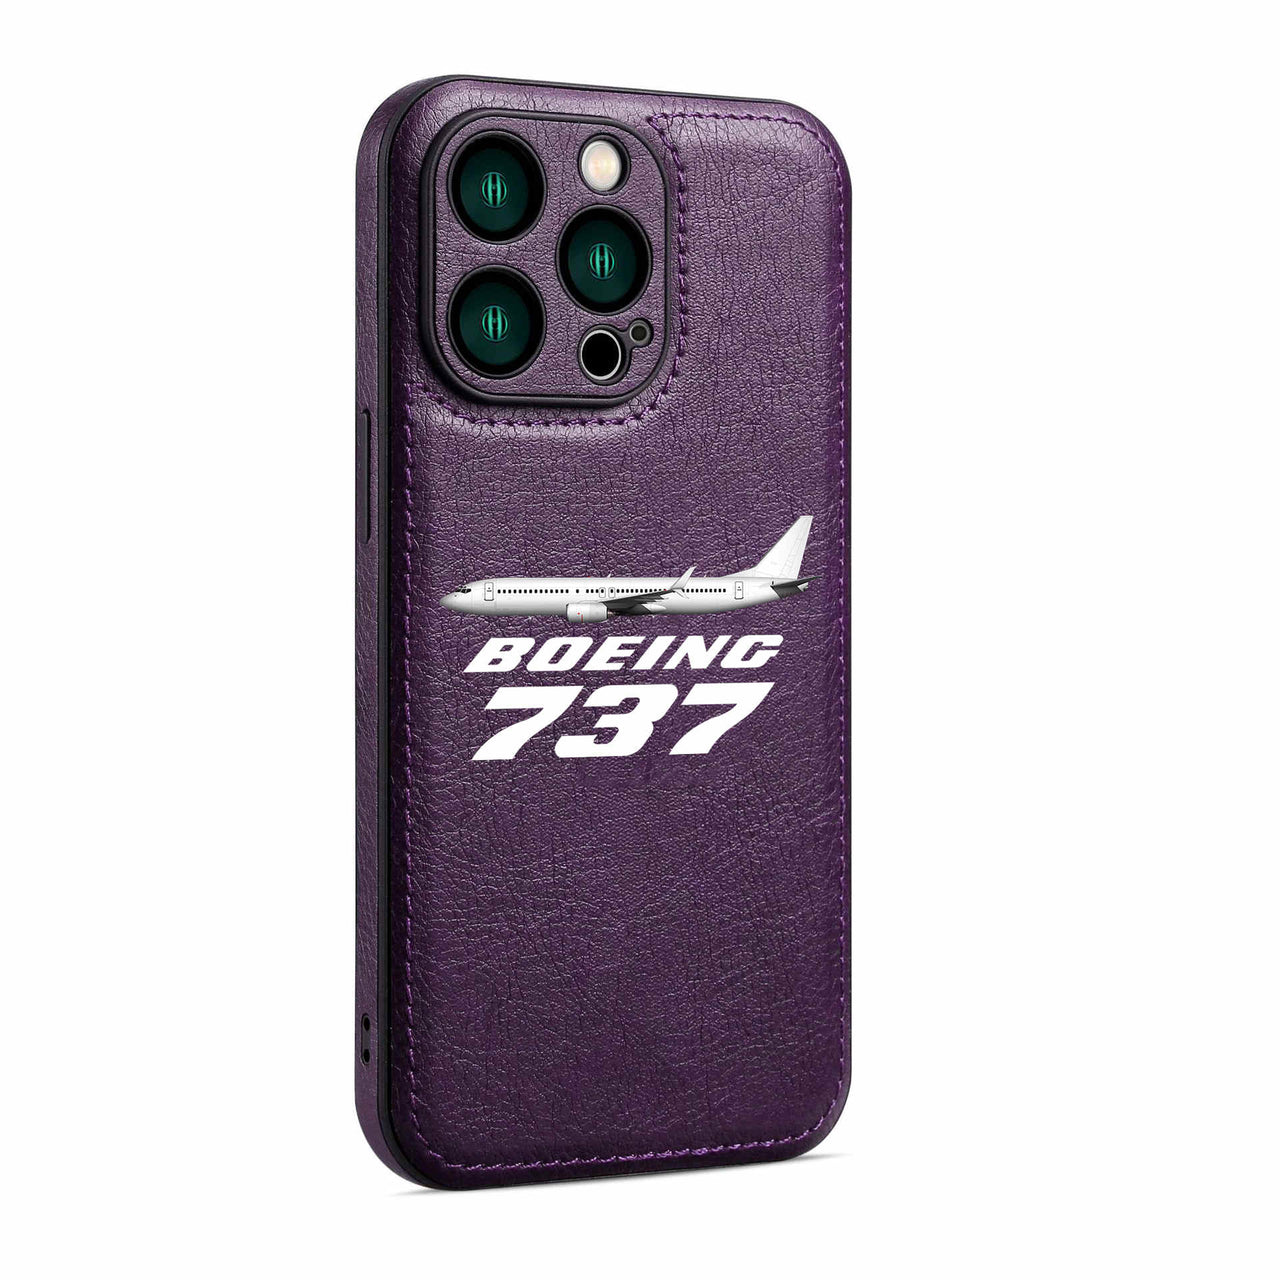 The Boeing 737 Designed Leather iPhone Cases